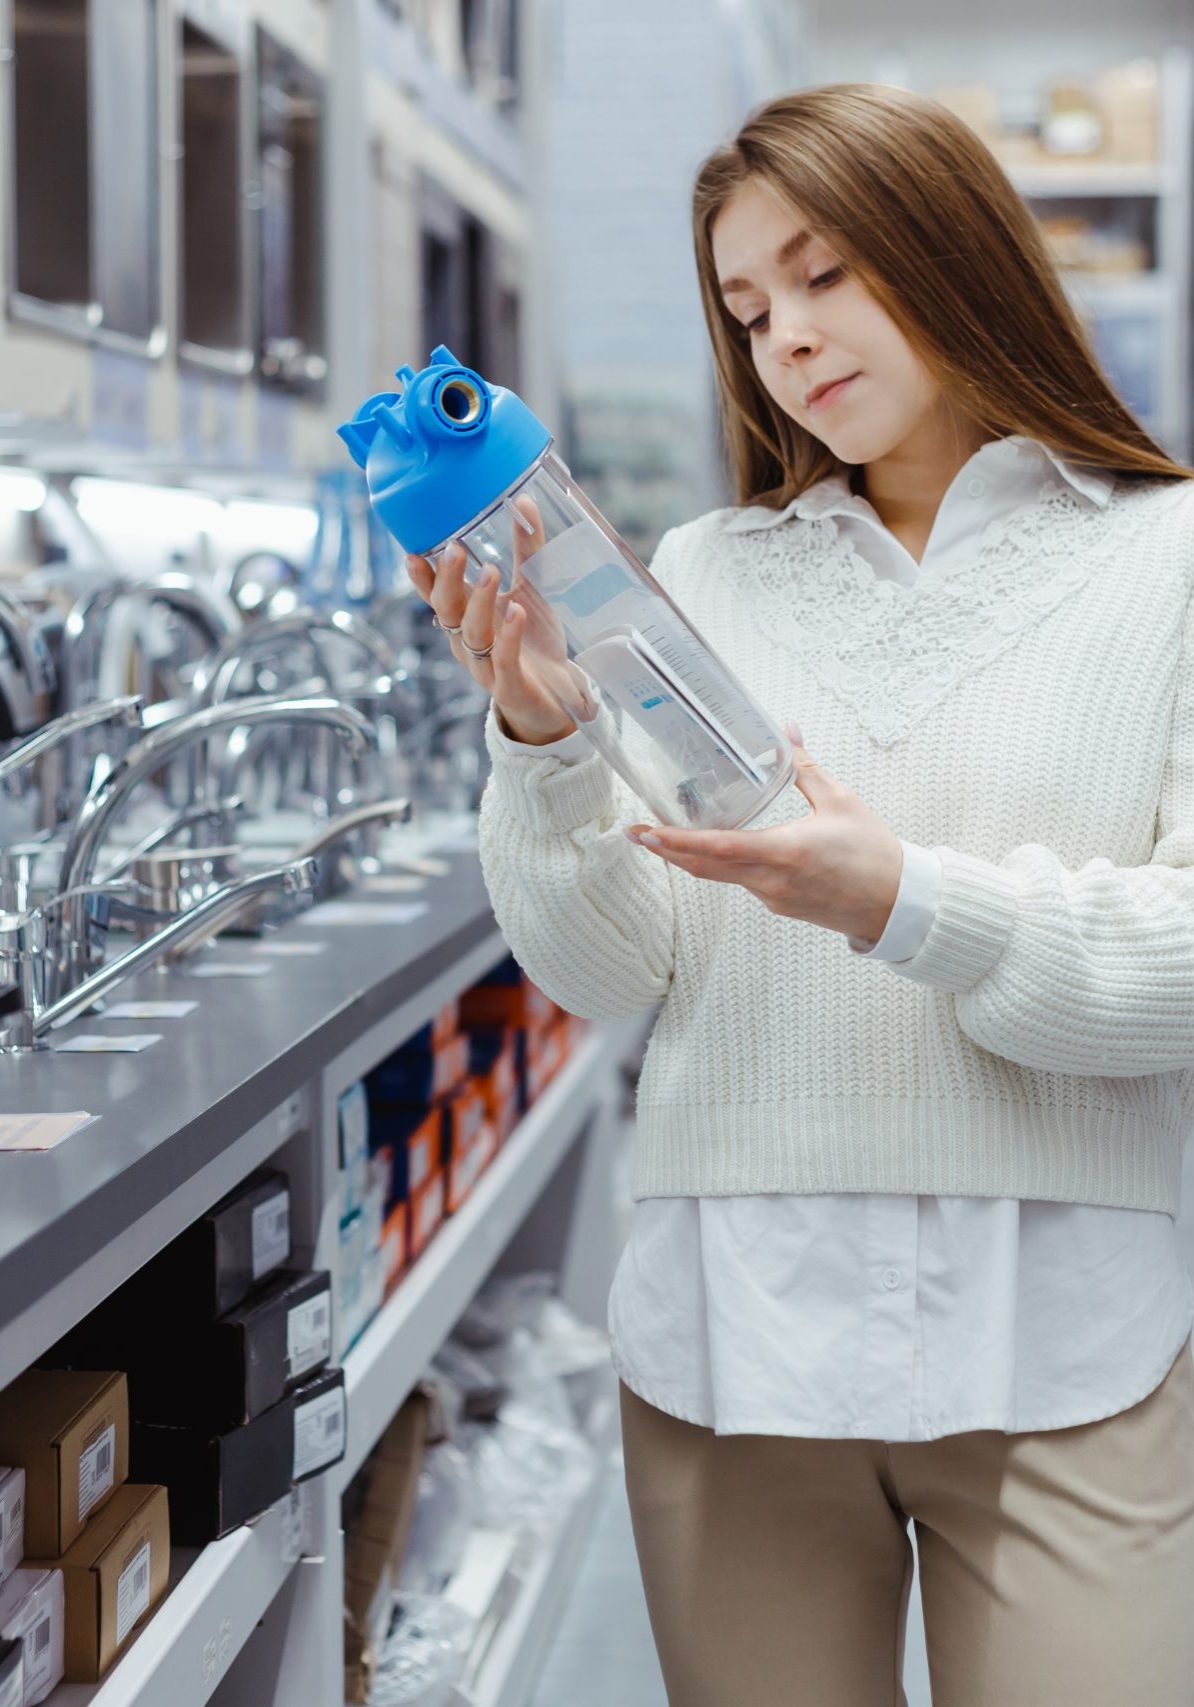 Woman holds household water filter for purification from mechanical impurities in hardware store. Repair of the water supply system at home, purchase of a filter. Woman in plumbing section